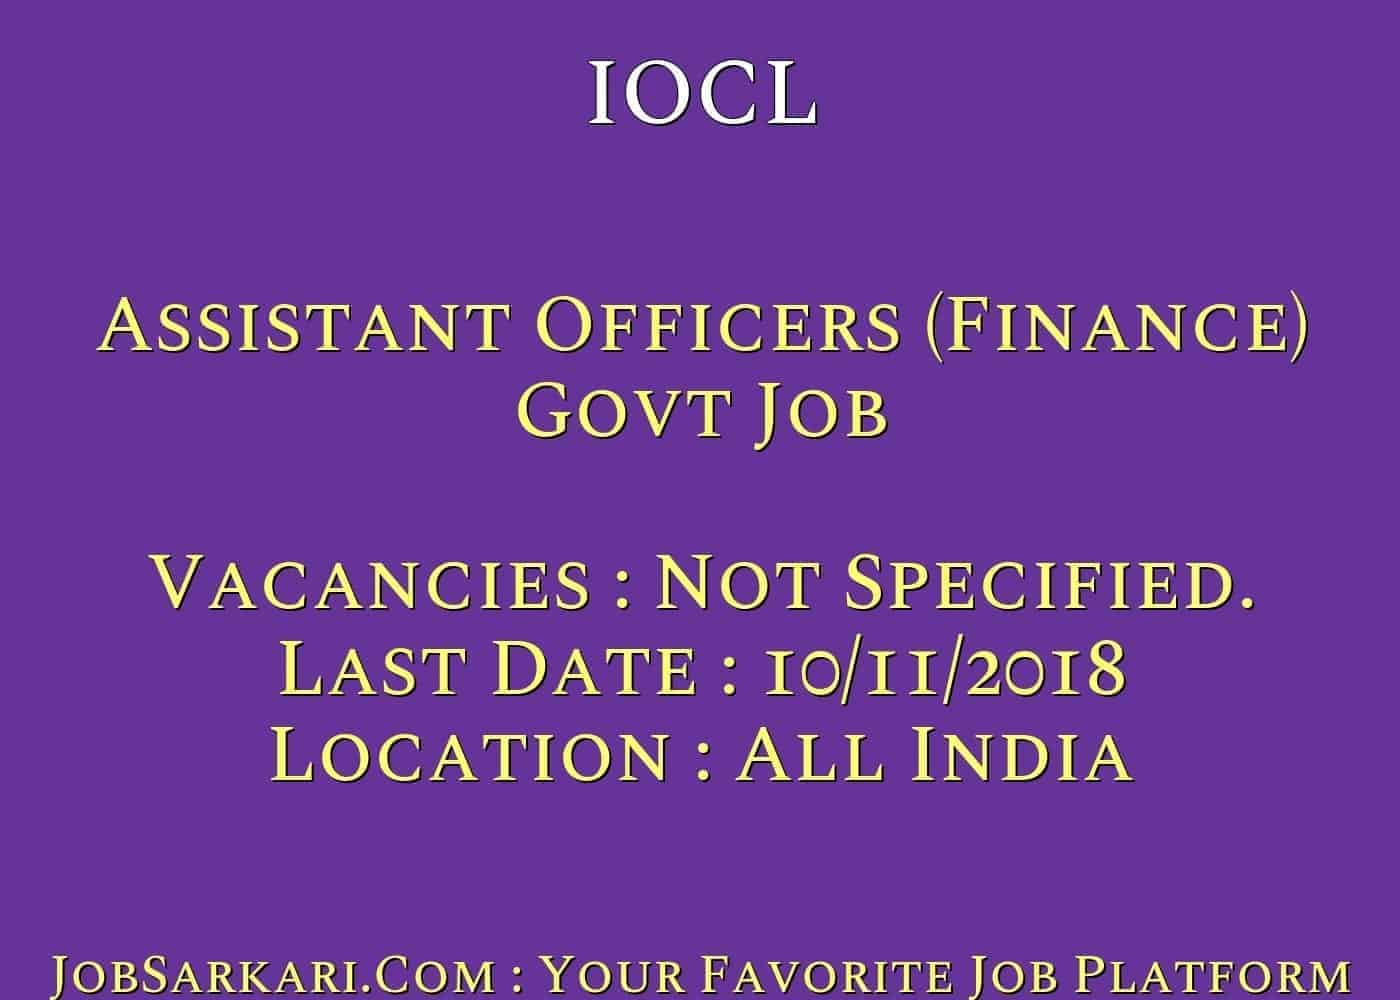 IOCL Recruitment 2018 for Assistant Officers (Finance) Govt Job